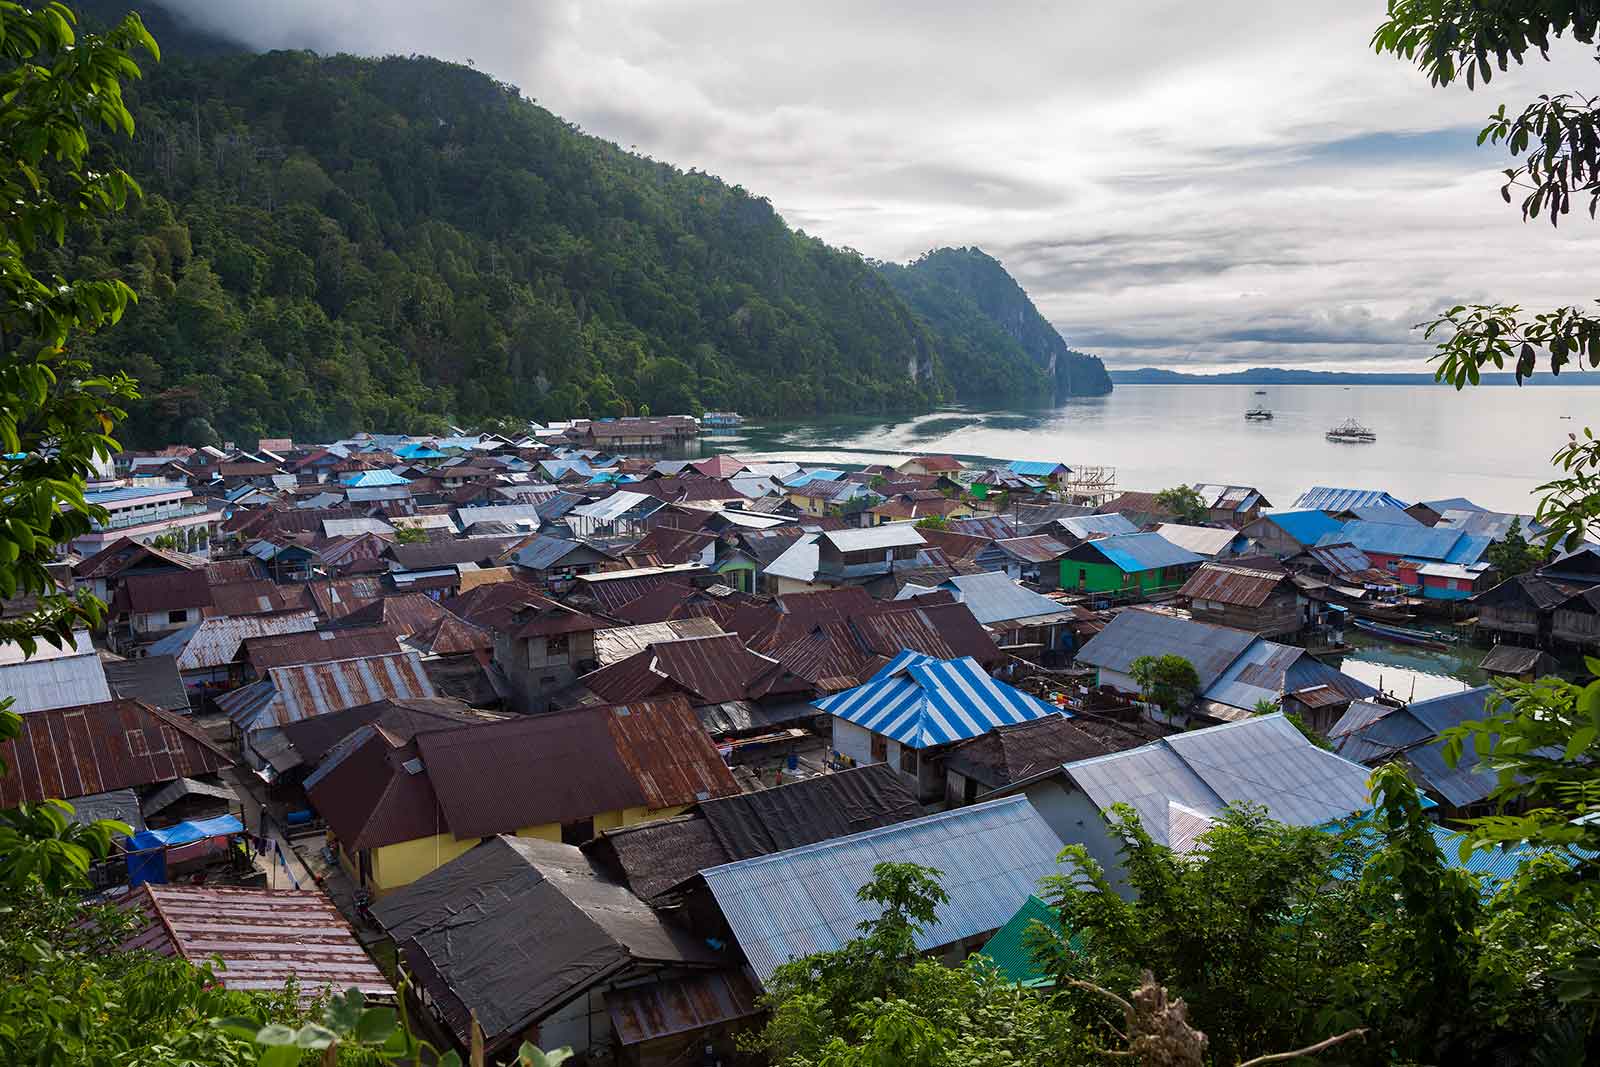 Maluku Islands: As seen here, Sawai village is located far away from civilisation and therefore not visited by tourists often.